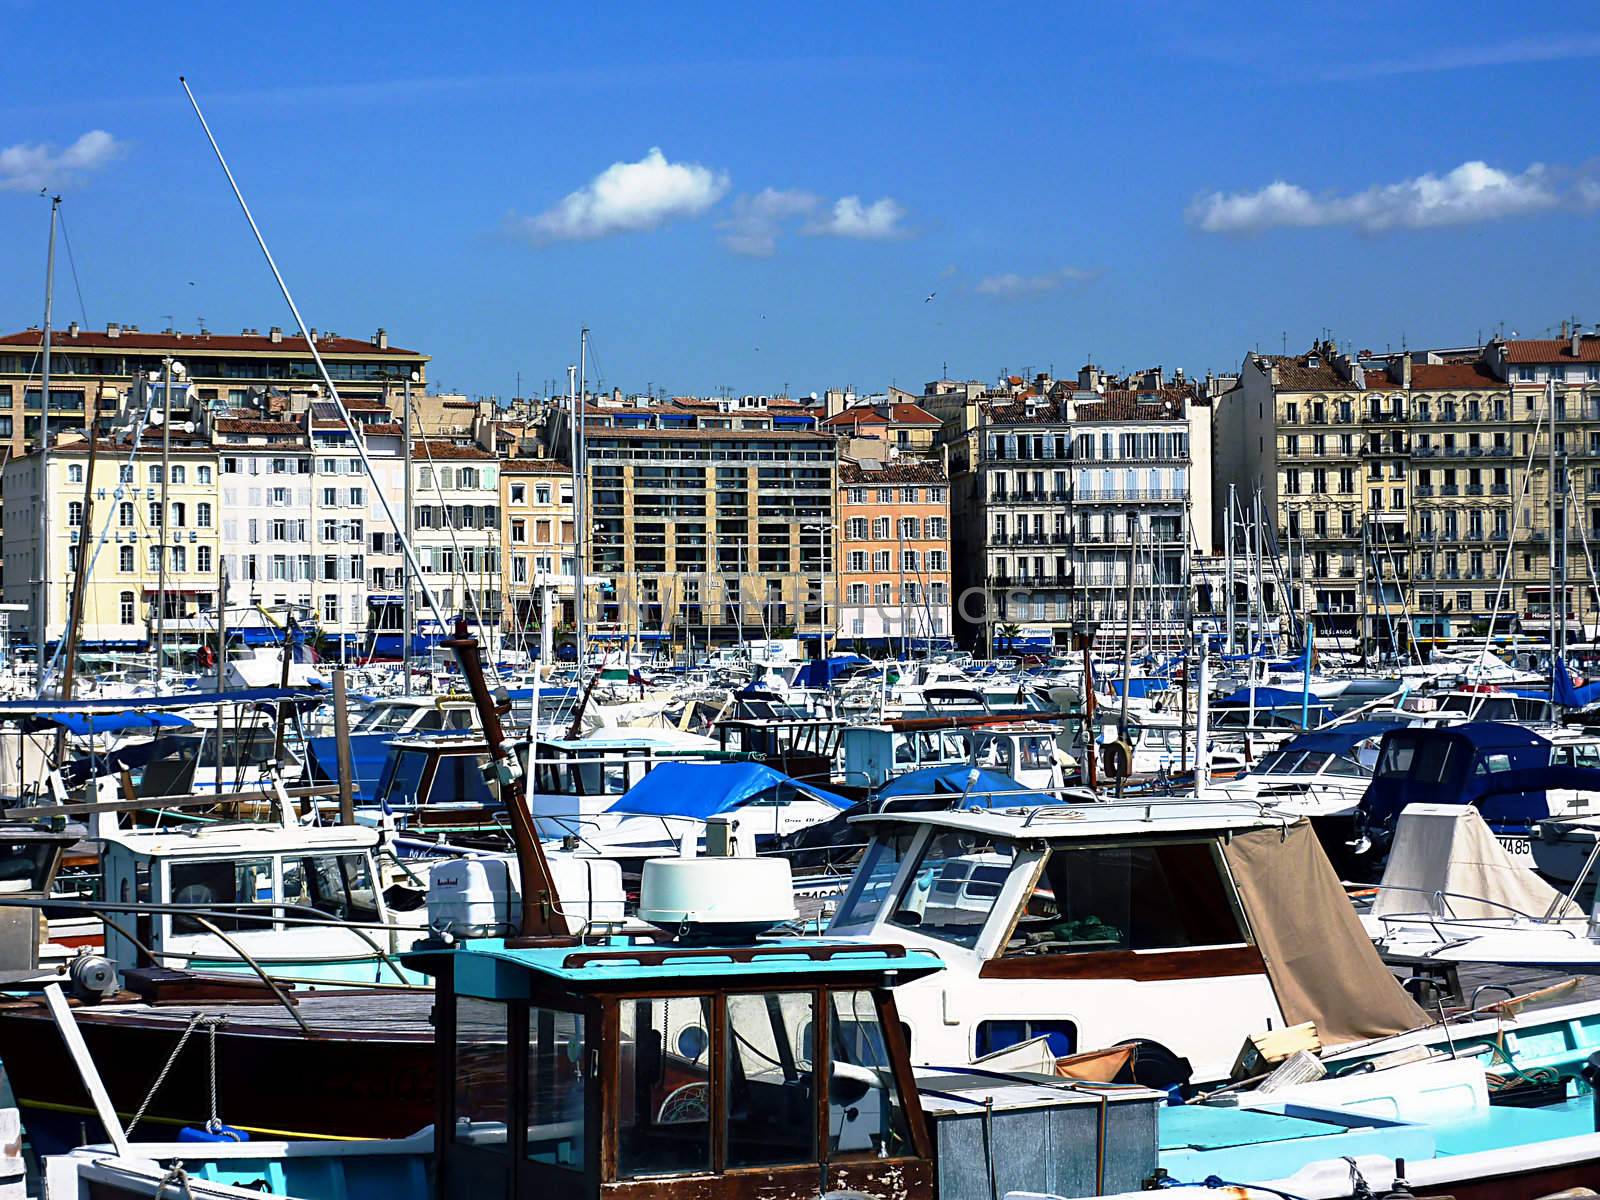 Many boats and buildings in the old port of Marseilles, France, by beautiful weather